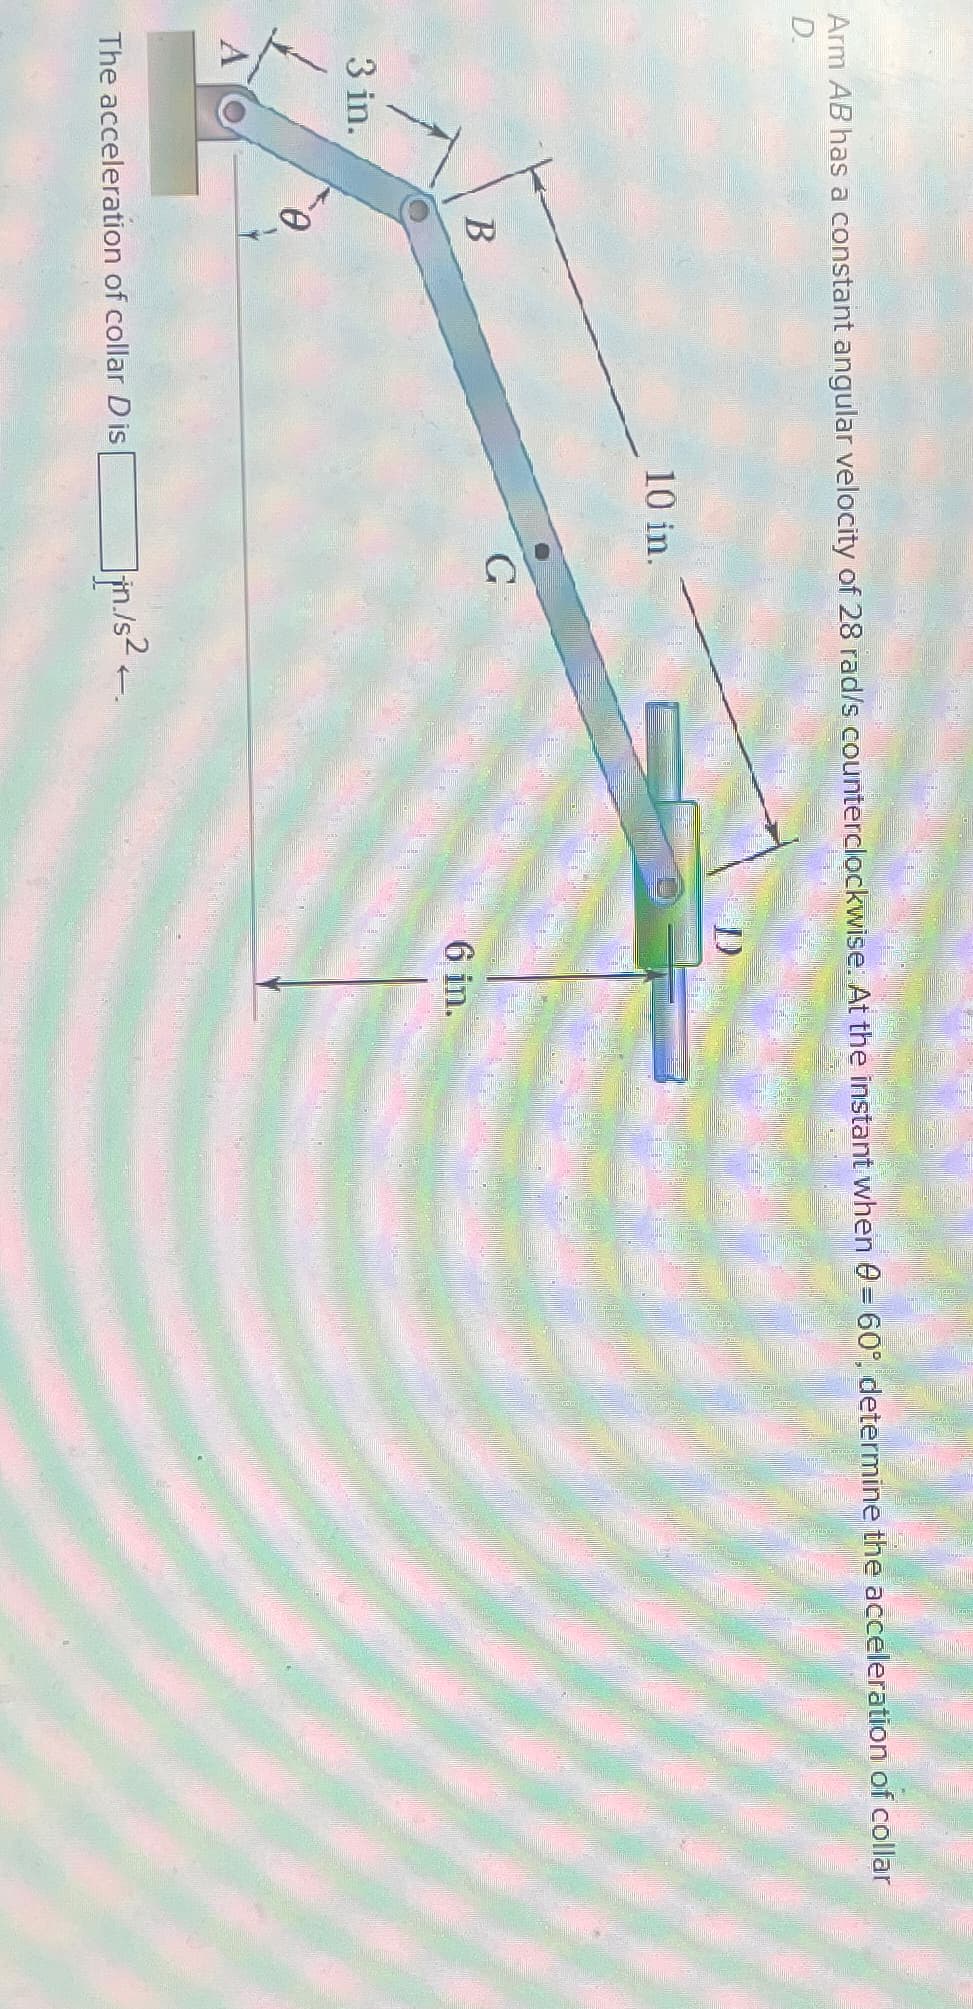 Arm AB has a constant angular velocity of 28 rad/s counterclockwise. At the instant when 0 = 60°, determine the acceleration of collar
D.
3 in.
10 in.
D
B
G
6 in.
-0
A
The acceleration of collar Dis
Jin/s²